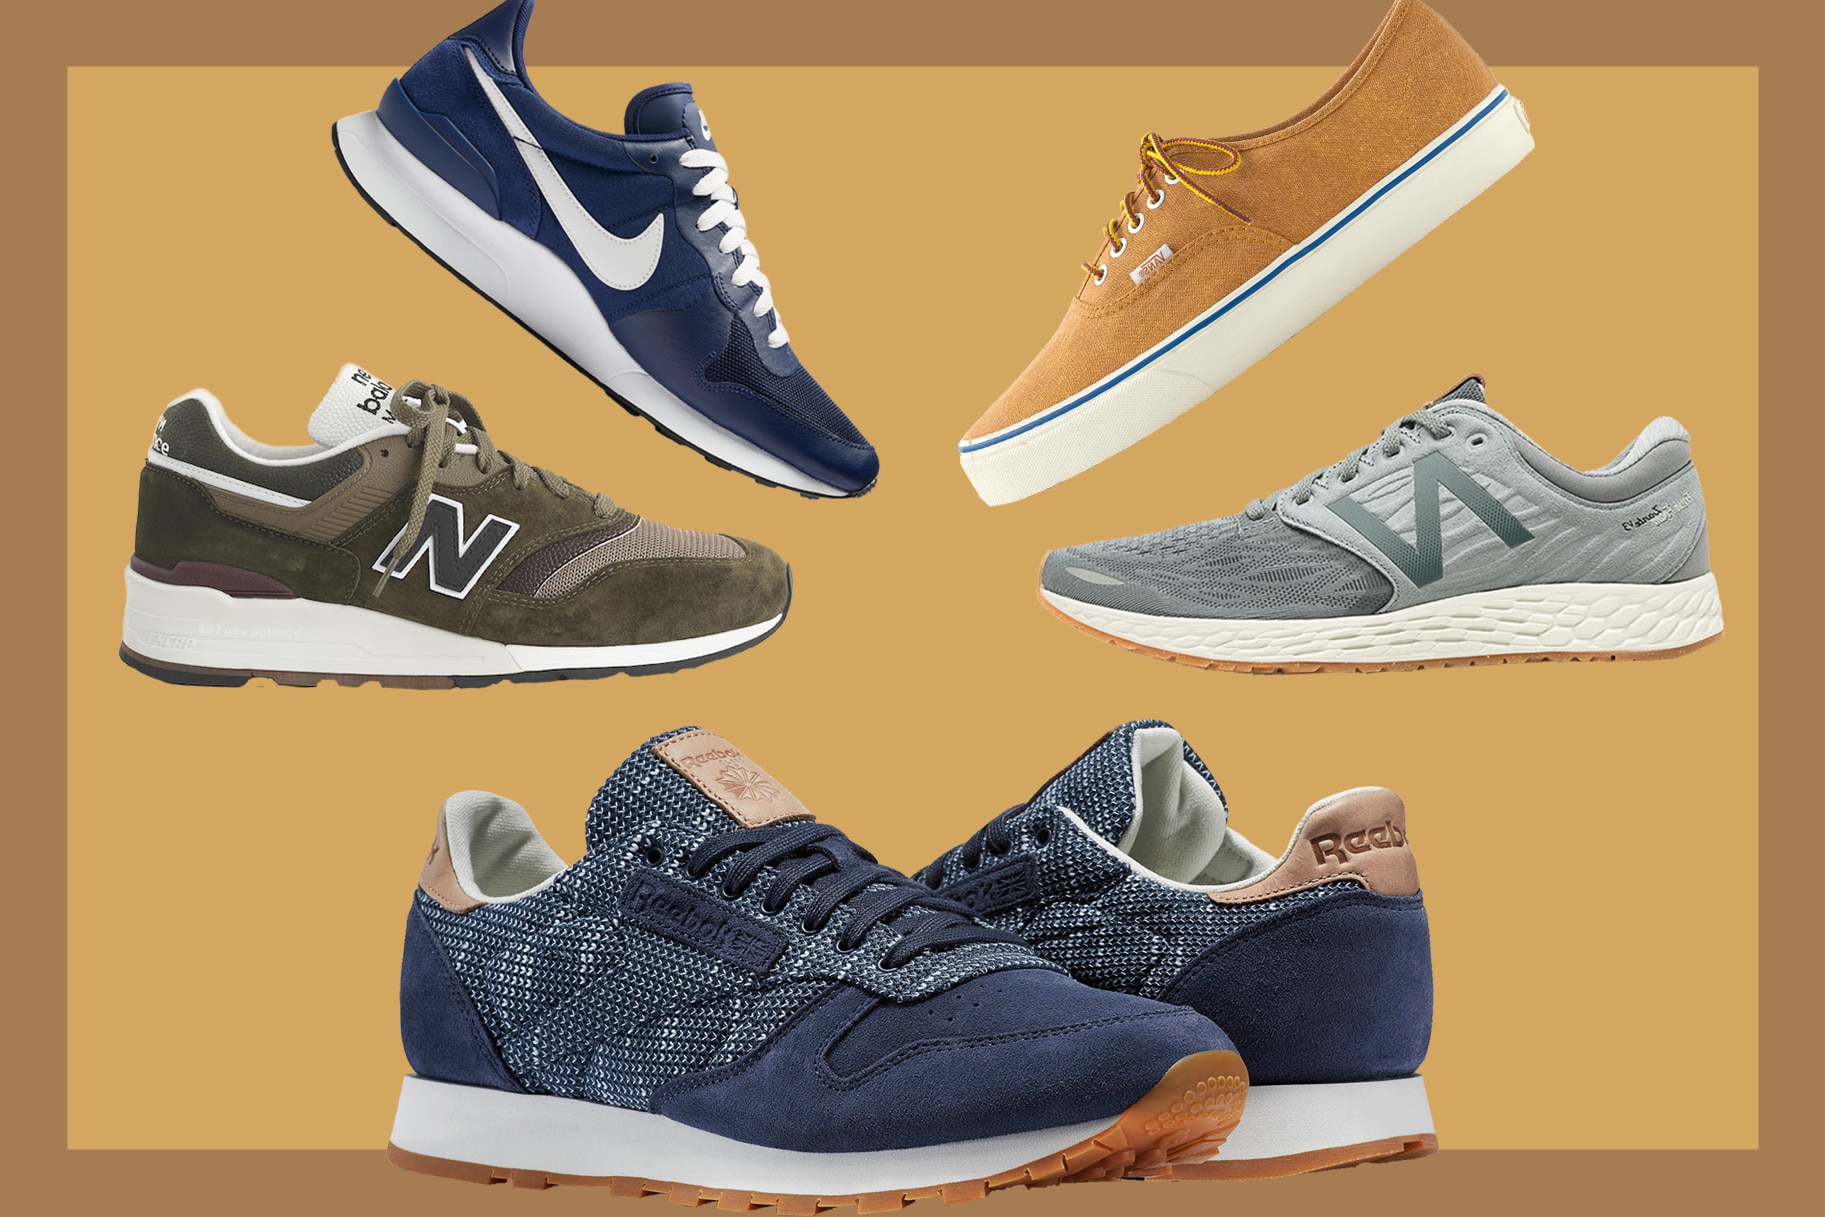 Best Fall Sneakers for Men 2017 | The Daily Dish